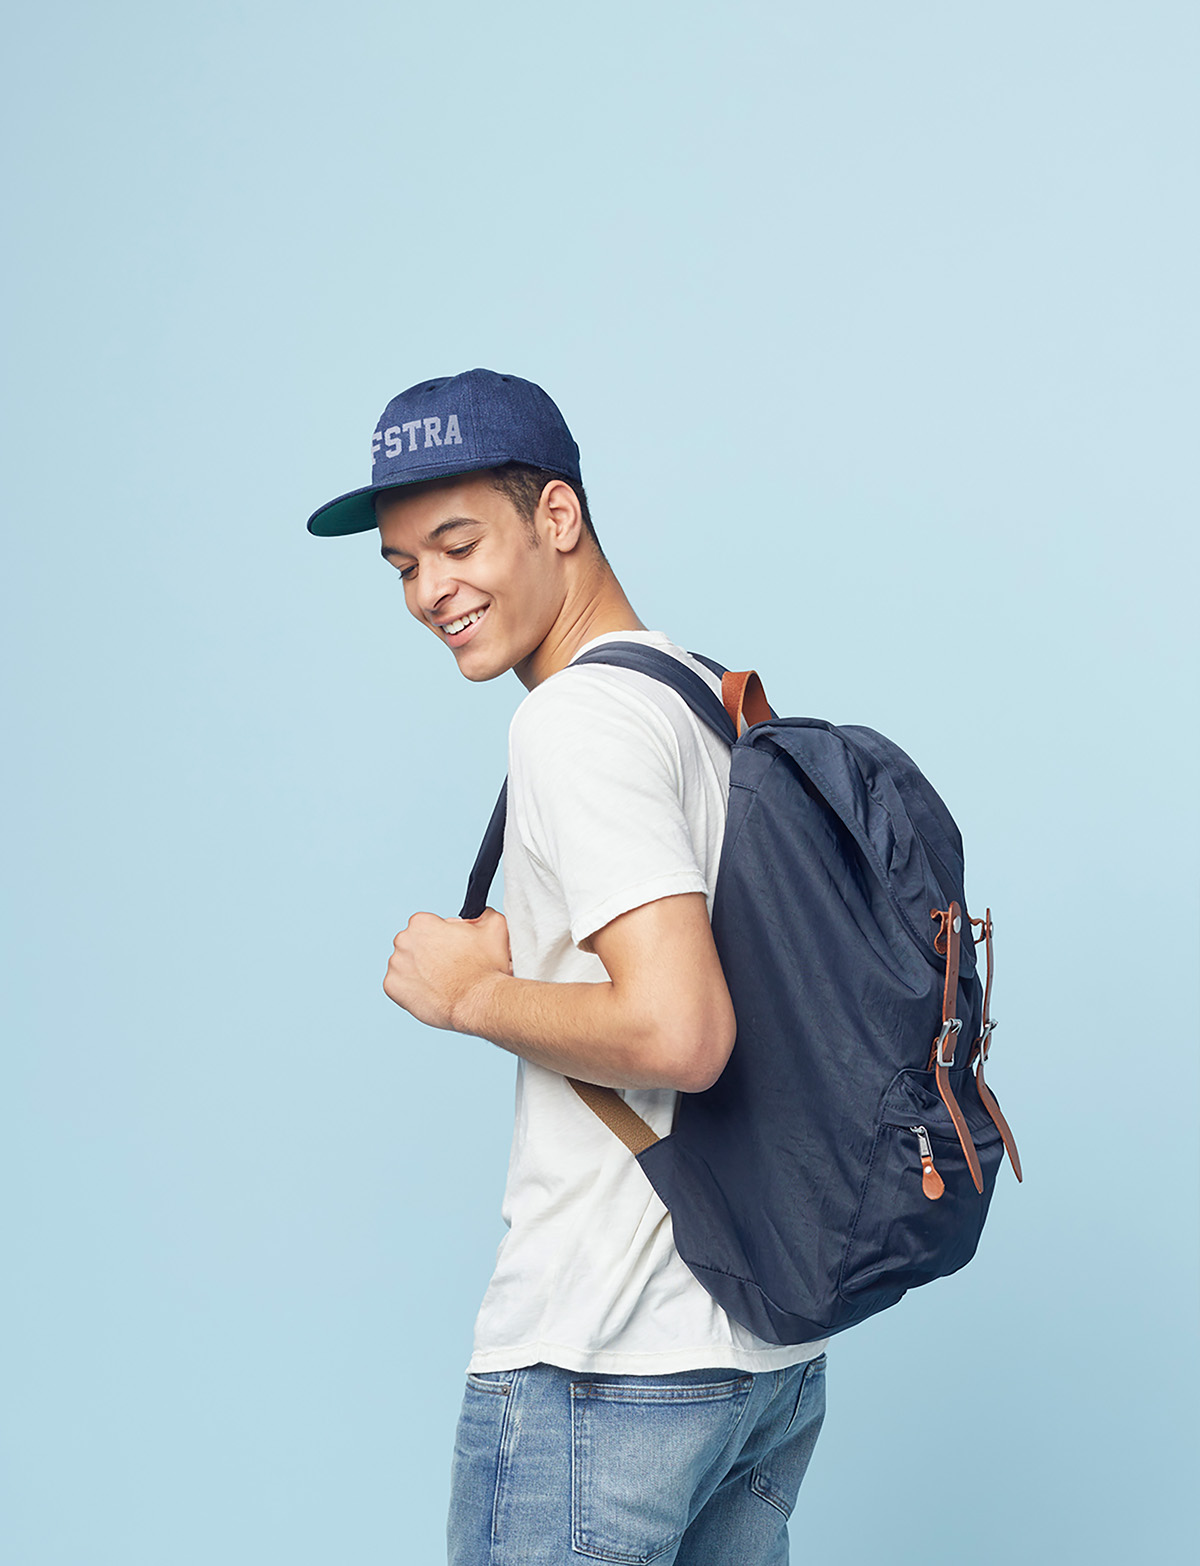 Young man with backpack